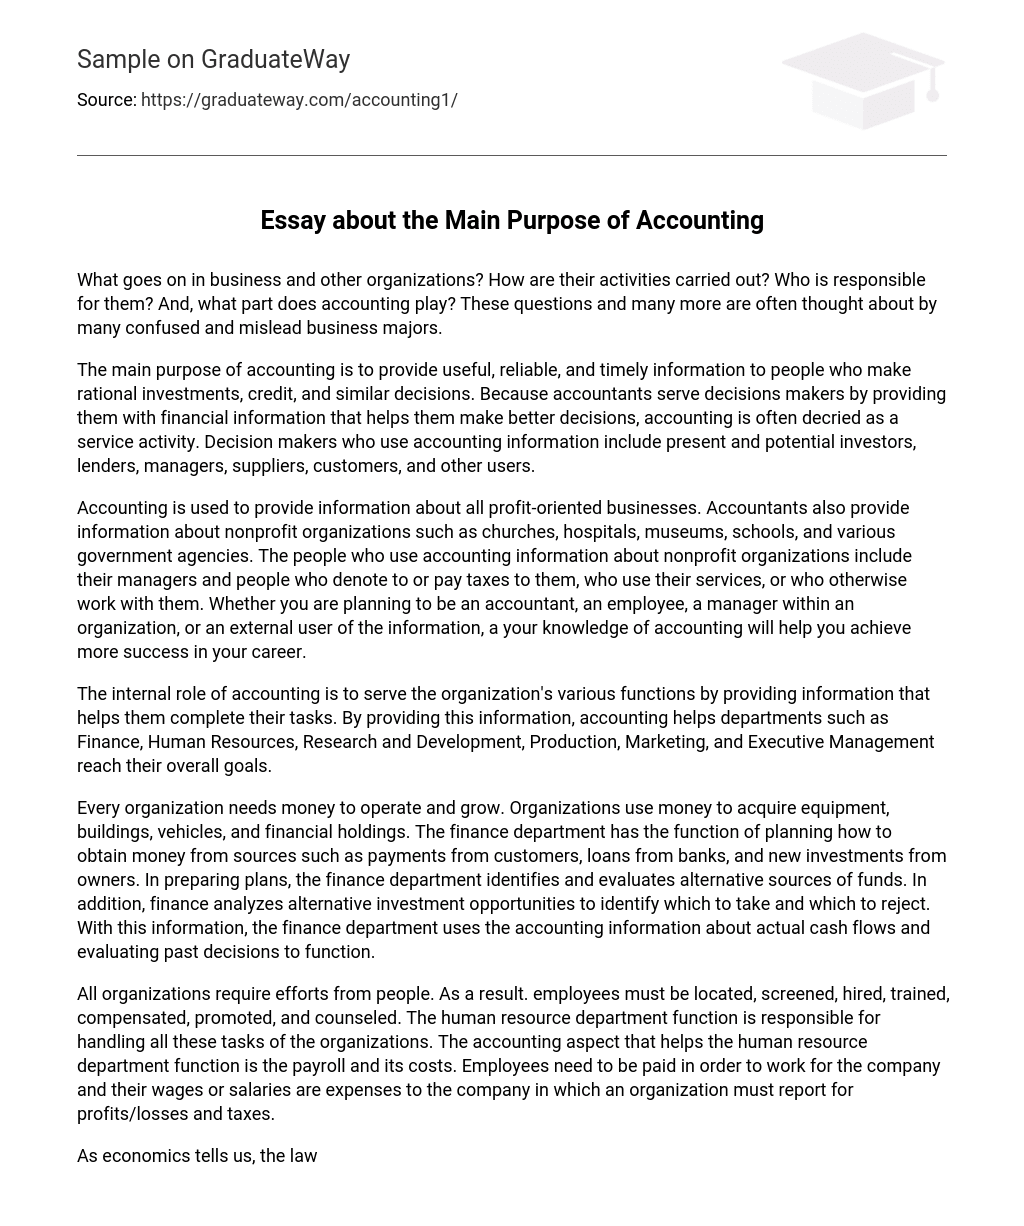 Essay about the Main Purpose of Accounting